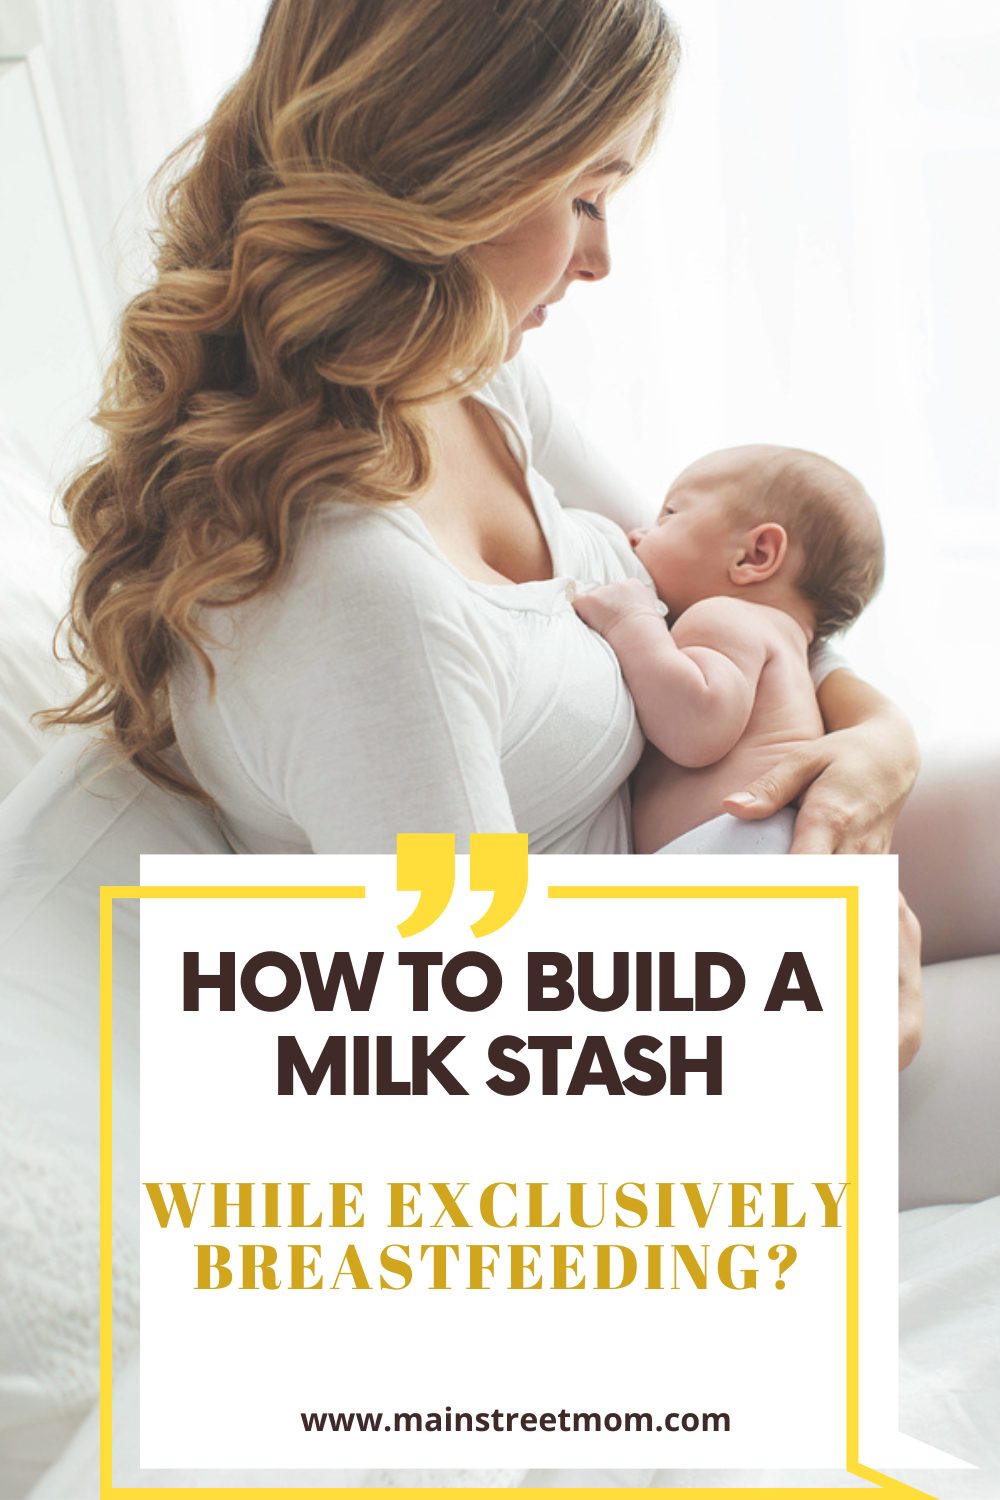 How To Build A Milk Stash While Exclusively Breastfeeding